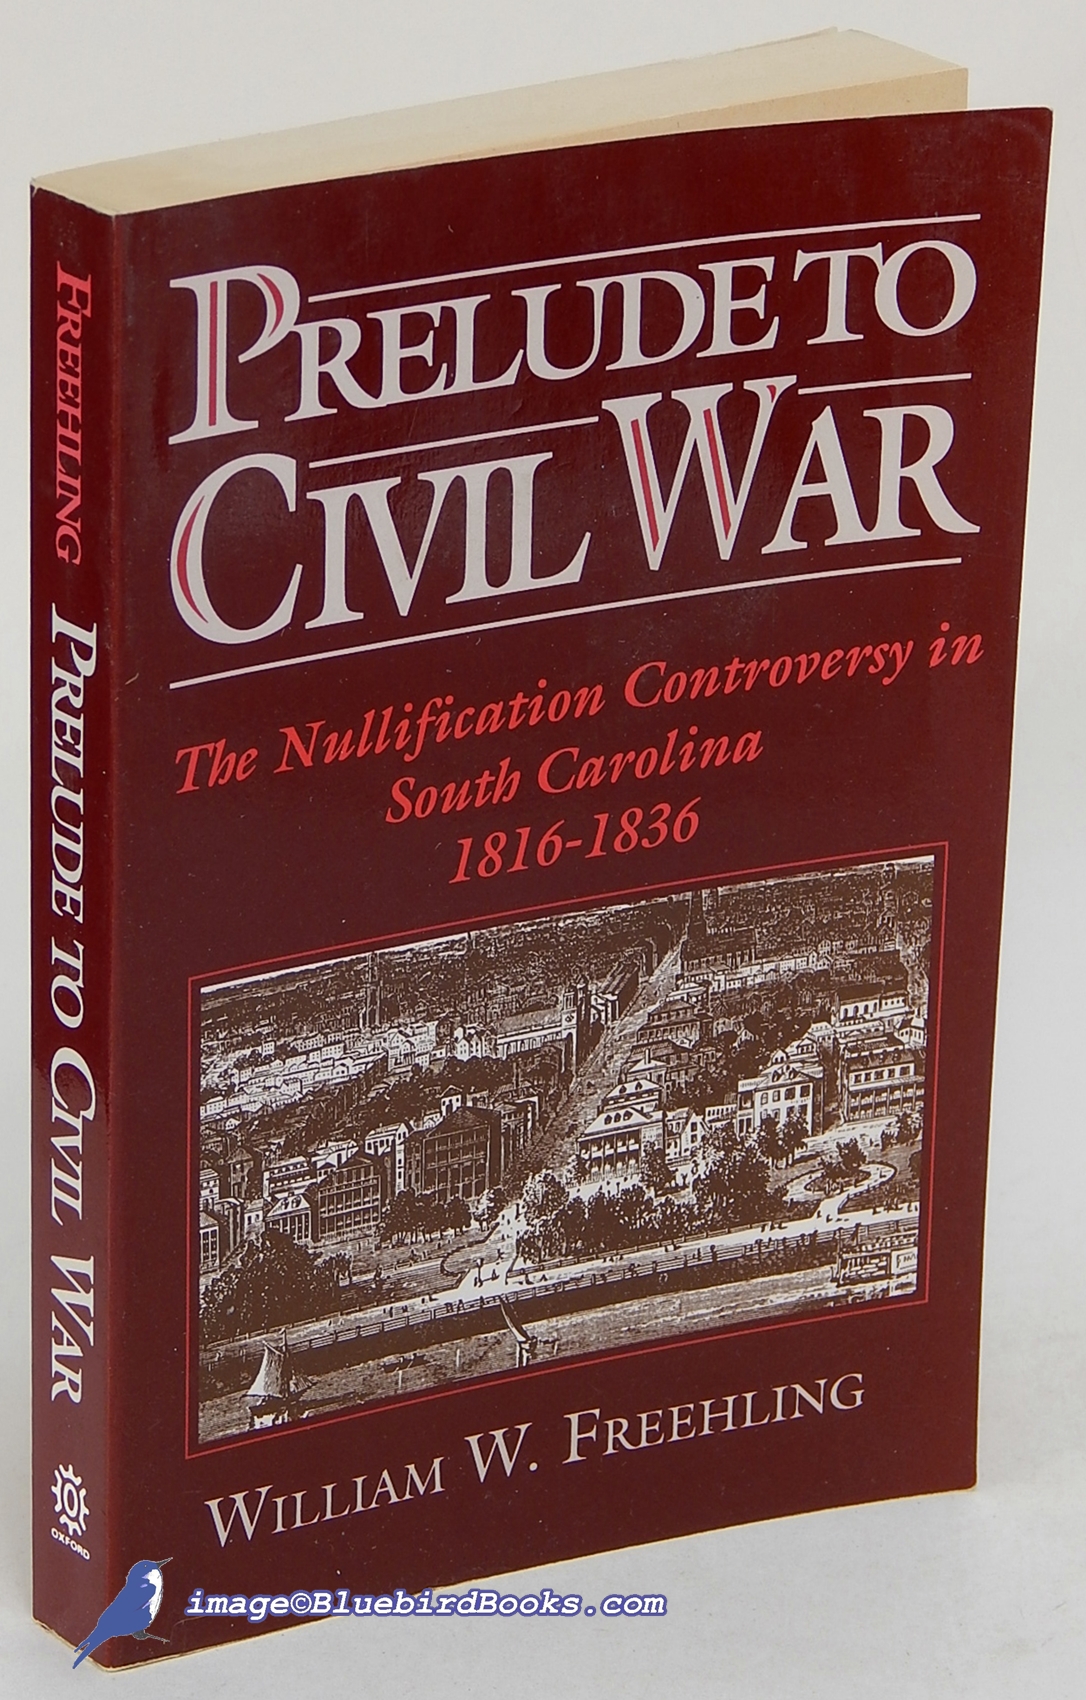 FREEHLING, WILLIAM W. - Prelude to CIVIL War: The Nullification Controversy in South Carolina, 1816-1836